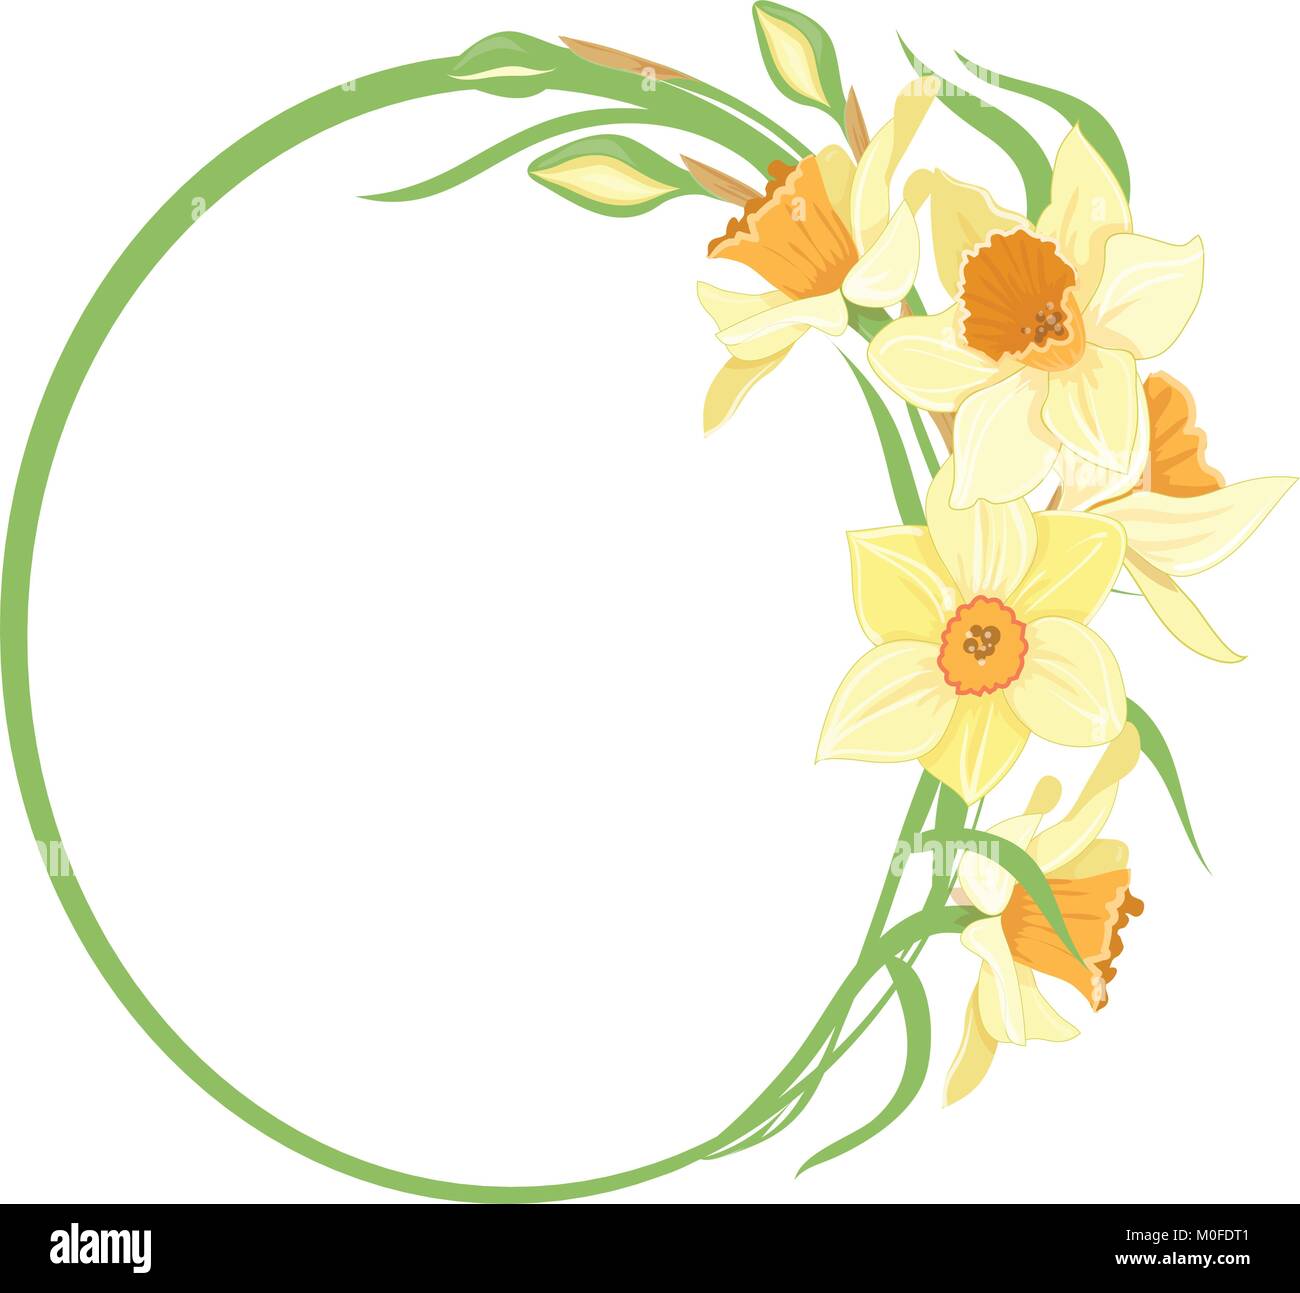 Bouquet narcissus in a round frame isolated vector clipart illustration of spring narcissus flowers Stock Vector